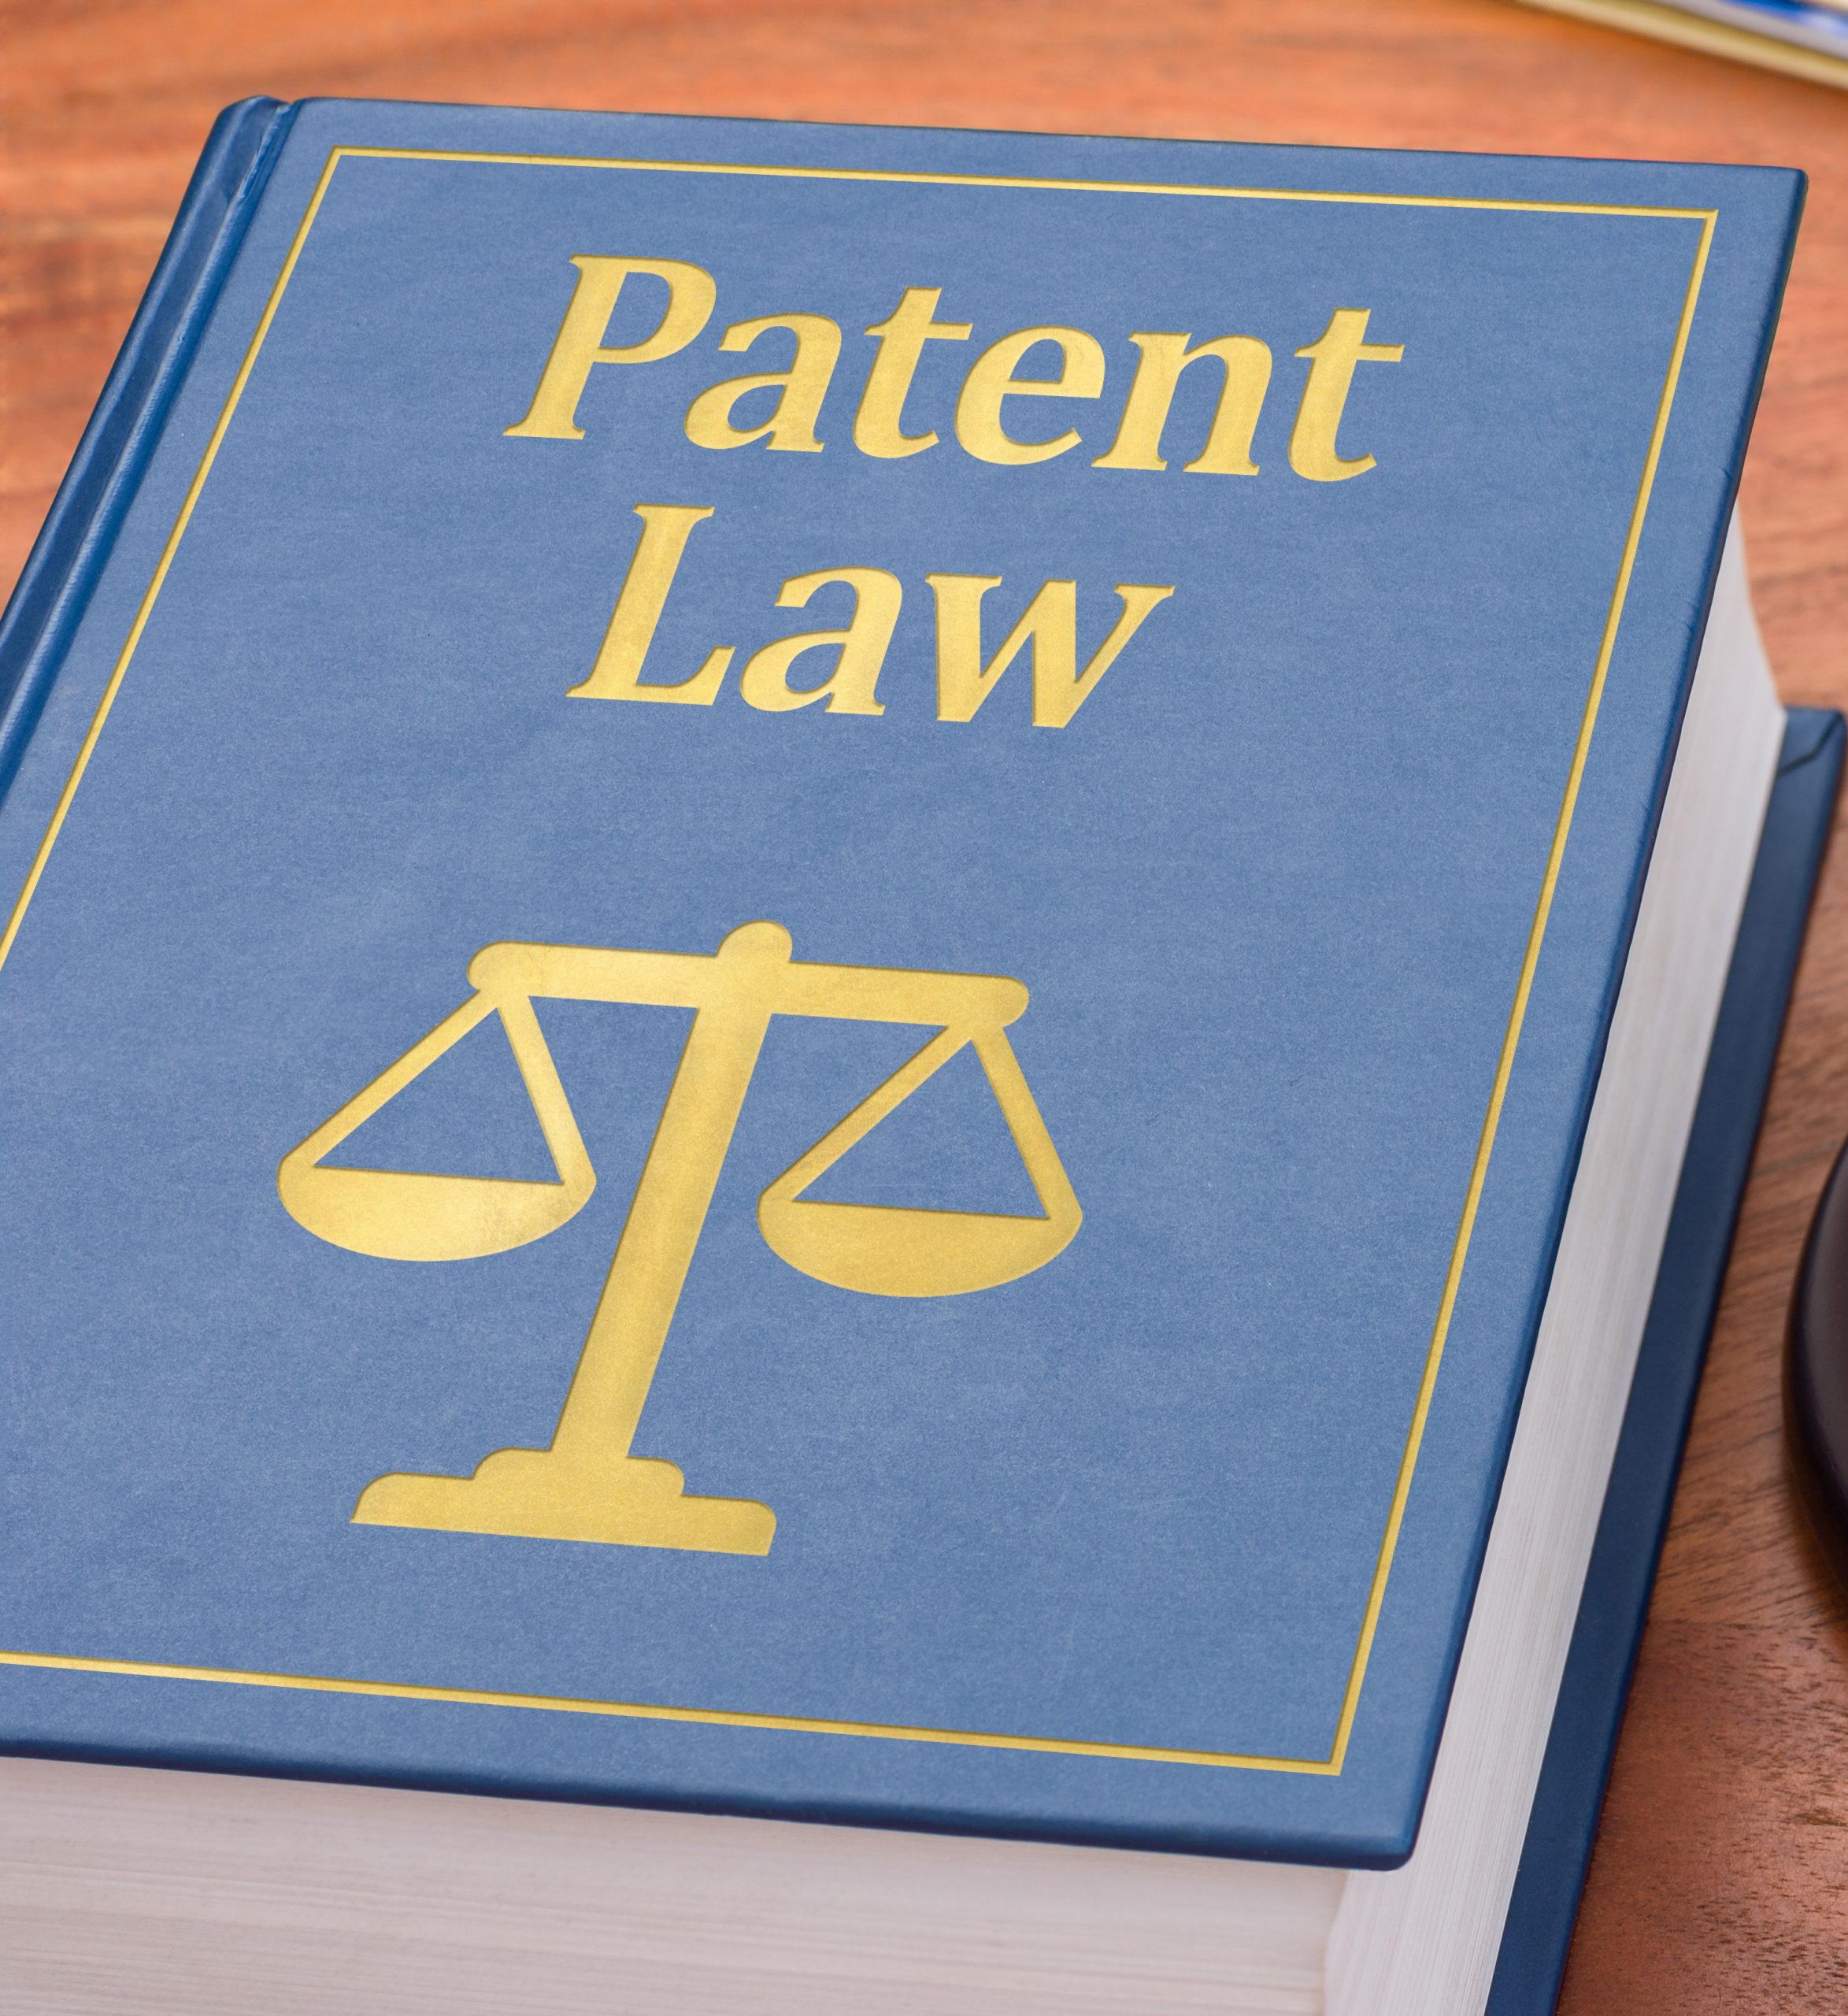 patent filings roundup - https://depositphotos.com/69425507/stock-photo-a-law-book-with-a.html